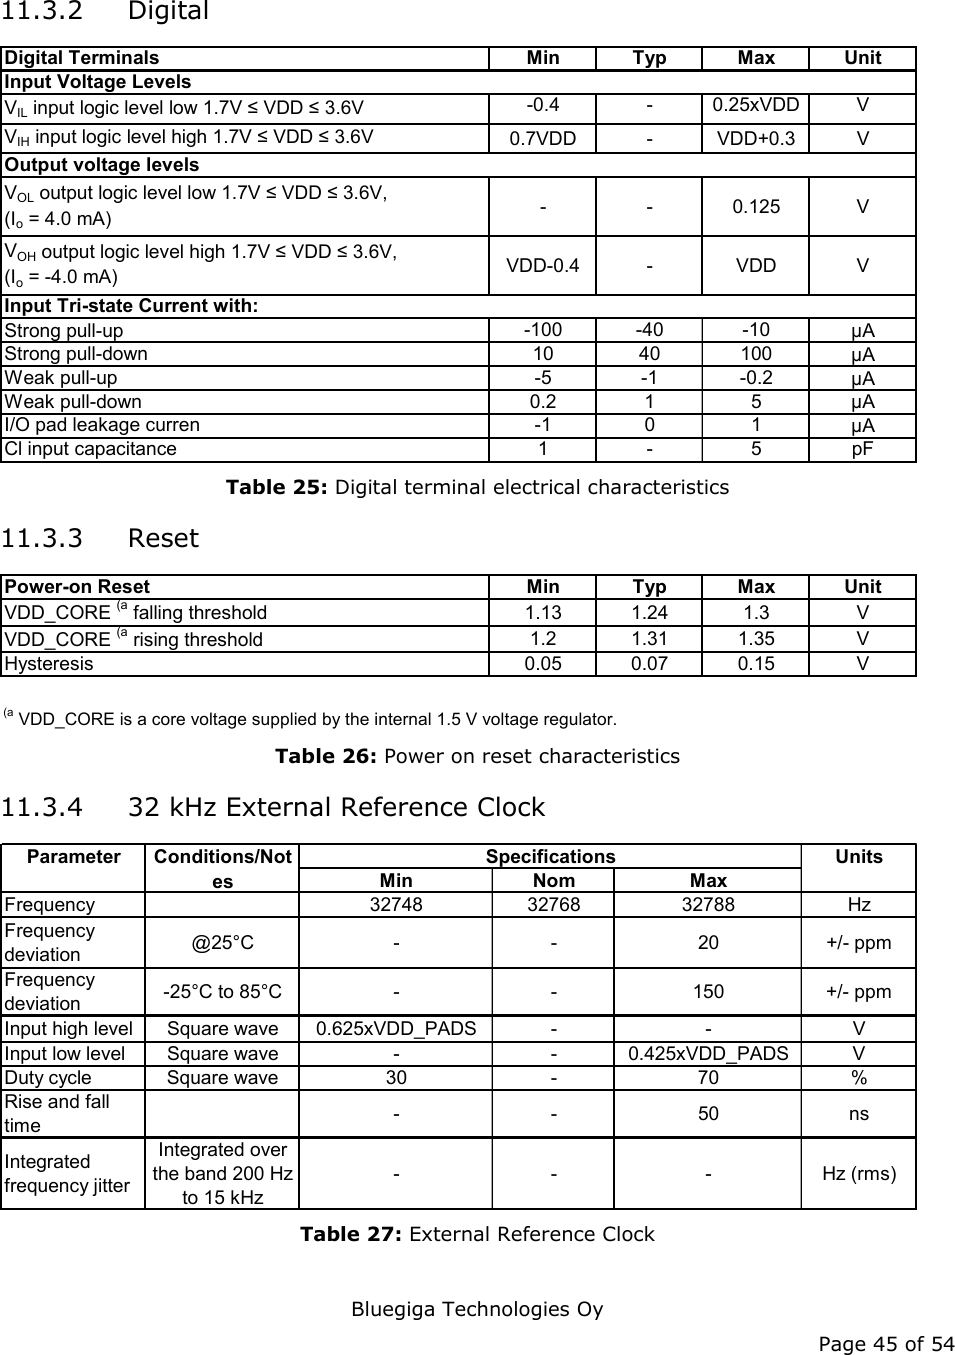   Bluegiga Technologies Oy Page 45 of 54 11.3.2 Digital Digital Terminals Min  Typ  Max UnitVIL input logic level low 1.7V ≤ VDD ≤ 3.6V  -0.4 - 0.25xVDD VVIH input logic level high 1.7V ≤ VDD ≤ 3.6V  0.7VDD - VDD+0.3 VVOL output logic level low 1.7V ≤ VDD ≤ 3.6V, (Io = 4.0 mA) --0.125VVOH output logic level high 1.7V ≤ VDD ≤ 3.6V, (Io = -4.0 mA) VDD-0.4 - VDD VStrong pull-up -100 -40 -10 µAStrong pull-down 10 40 100 µAWeak pull-up -5 -1 -0.2 µAWeak pull-down 0.2 1 5 µAI/O pad leakage curren -1 0 1 µACl input capacitance 1 - 5 pFInput Voltage LevelsOutput voltage levelsInput Tri-state Current with:  Table 25: Digital terminal electrical characteristics 11.3.3 Reset Power-on Reset Min  Typ  Max UnitVDD_CORE (a falling threshold 1.13 1.24 1.3 VVDD_CORE (a rising threshold 1.2 1.31 1.35 VHysteresis 0.05 0.07 0.15 V(a VDD_CORE is a core voltage supplied by the internal 1.5 V voltage regulator. Table 26: Power on reset characteristics 11.3.4 32 kHz External Reference Clock Min Nom MaxFrequency 32748 32768 32788 HzFrequency deviation @25°C - - 20 +/- ppmFrequency deviation -25°C to 85°C - - 150 +/- ppmInput high level Square wave 0.625xVDD_PADS - - VInput low level Square wave - - 0.425xVDD_PADS VDuty cycle Square wave 30 - 70 %Rise and fall time - - 50 nsIntegrated frequency jitterIntegrated over the band 200 Hz to 15 kHz---Hz (rms)UnitsParameter Conditions/NotesSpecifications Table 27: External Reference Clock 